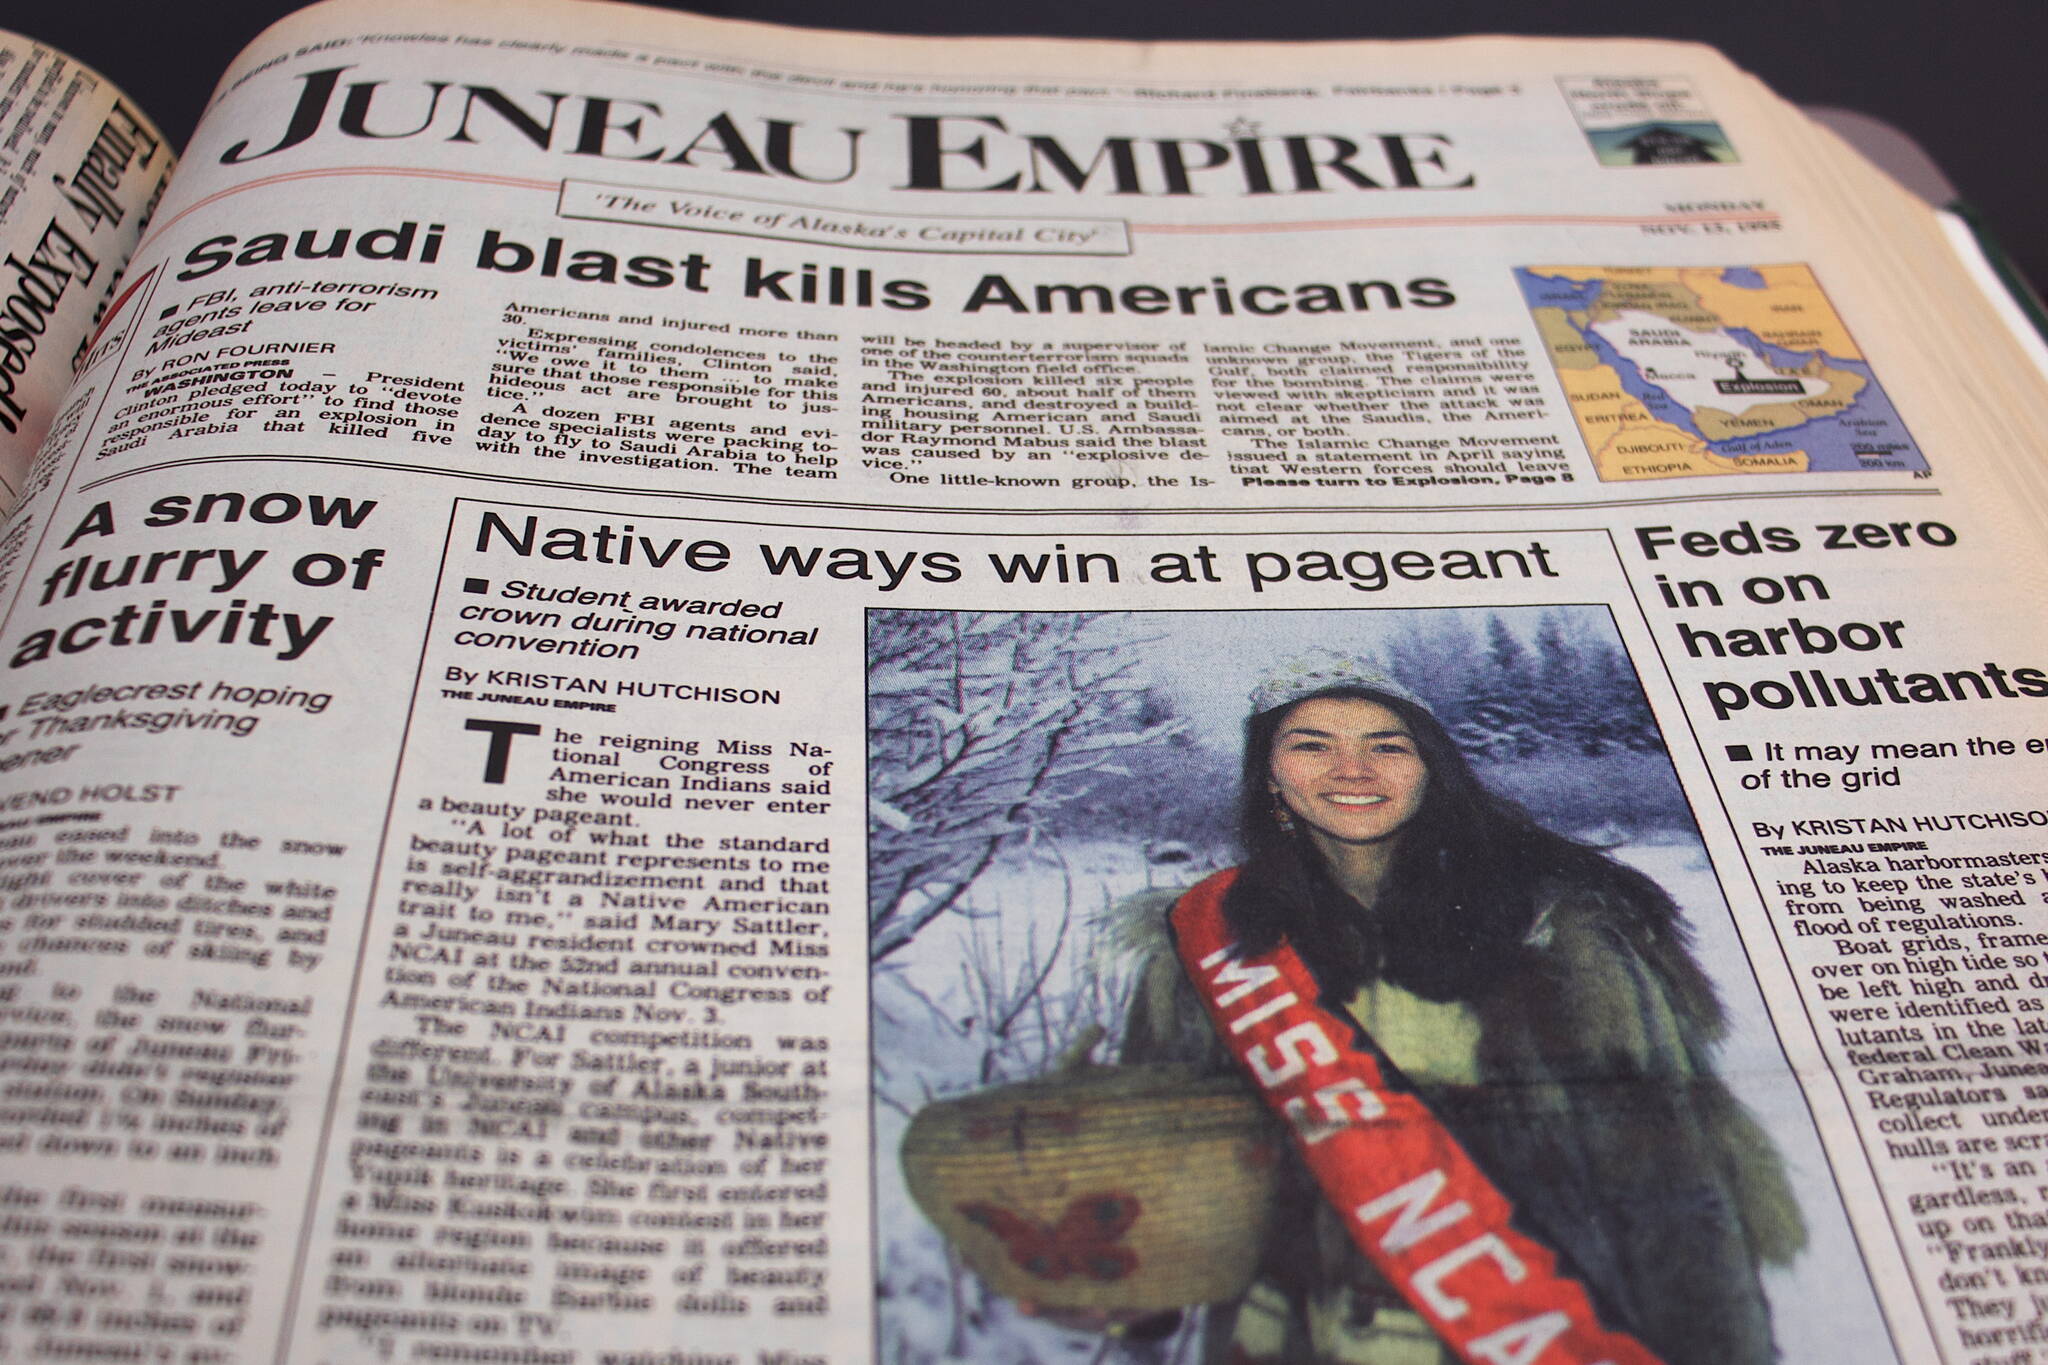 The front page of the Juneau Empire on Nov. 13, 1995. (Photo by Mark Sabbatini / Juneau Empire)